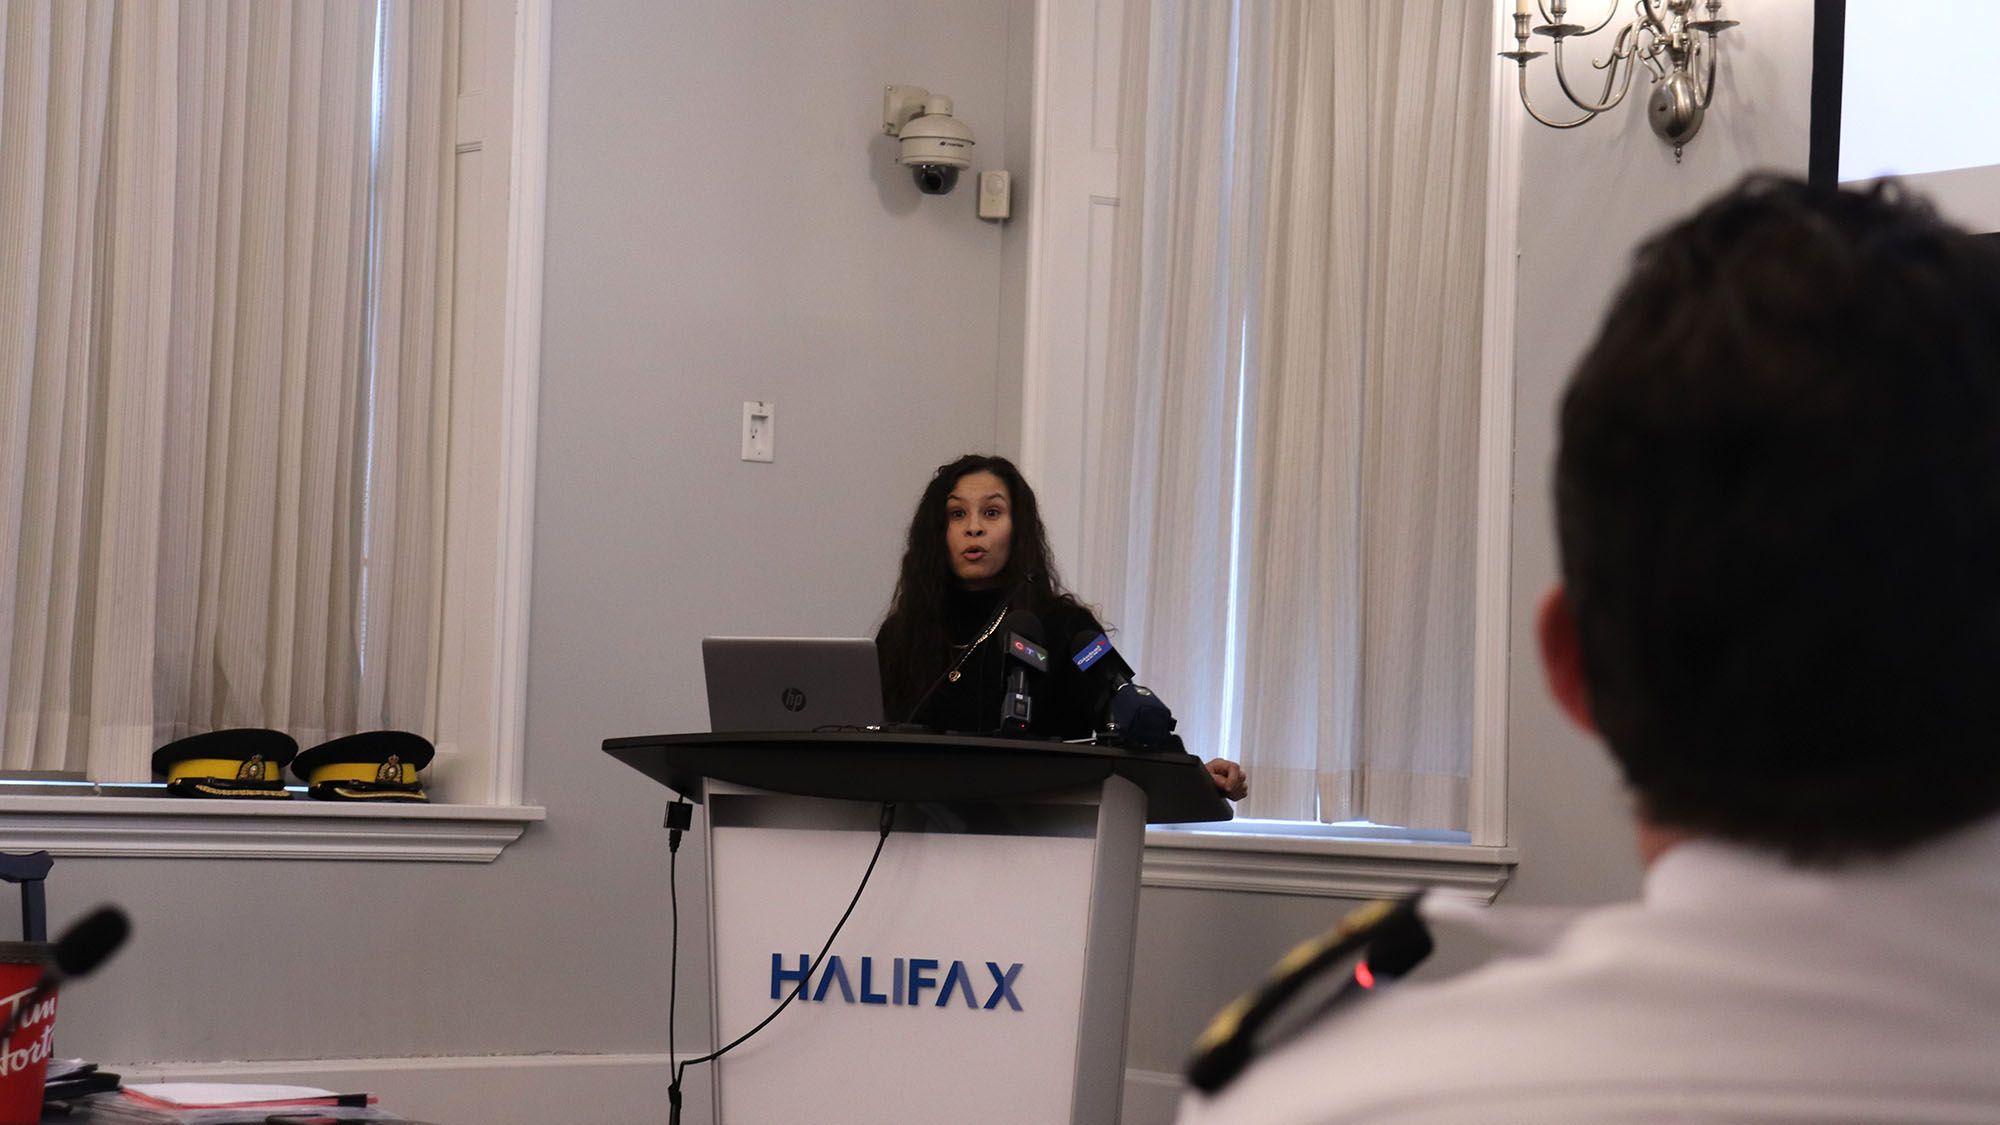 HRP Chief Dan Kinsella (foreground) watches Halifax activist El Jones speak at the board of police commissioners meeting on Monday. Jones said the police budget should be frozen until HRP takes better action on racial profiling.